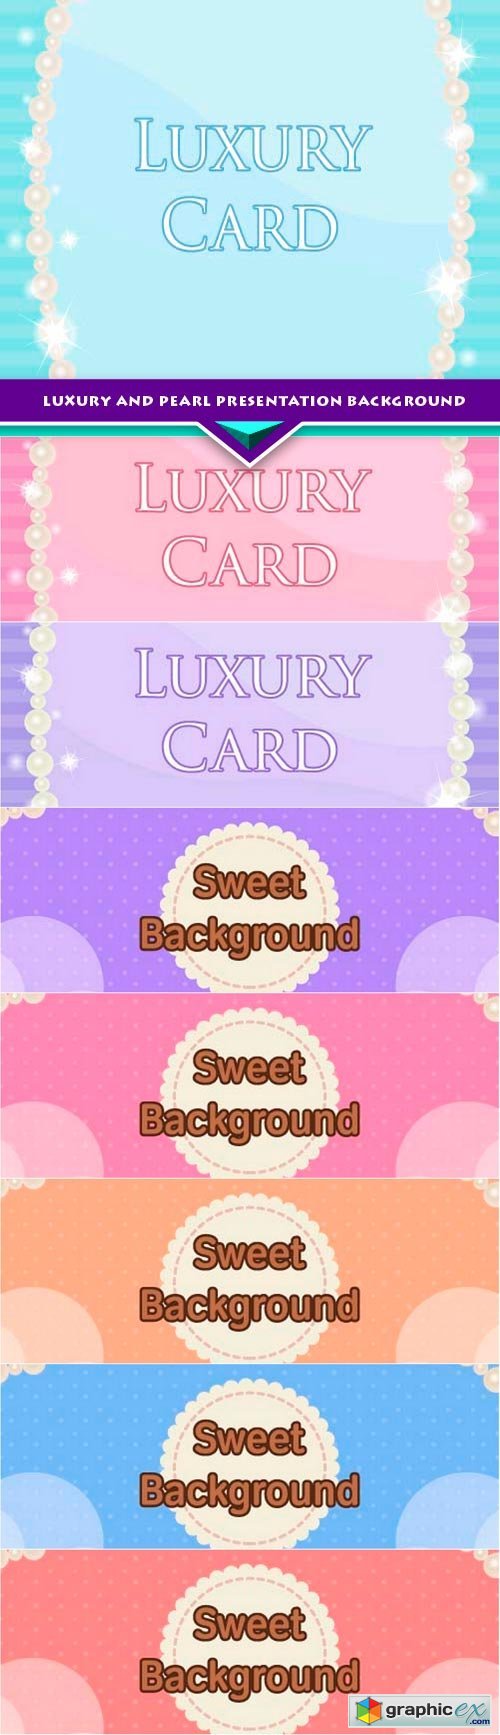 Luxury and pearl presentation background 8x EPS